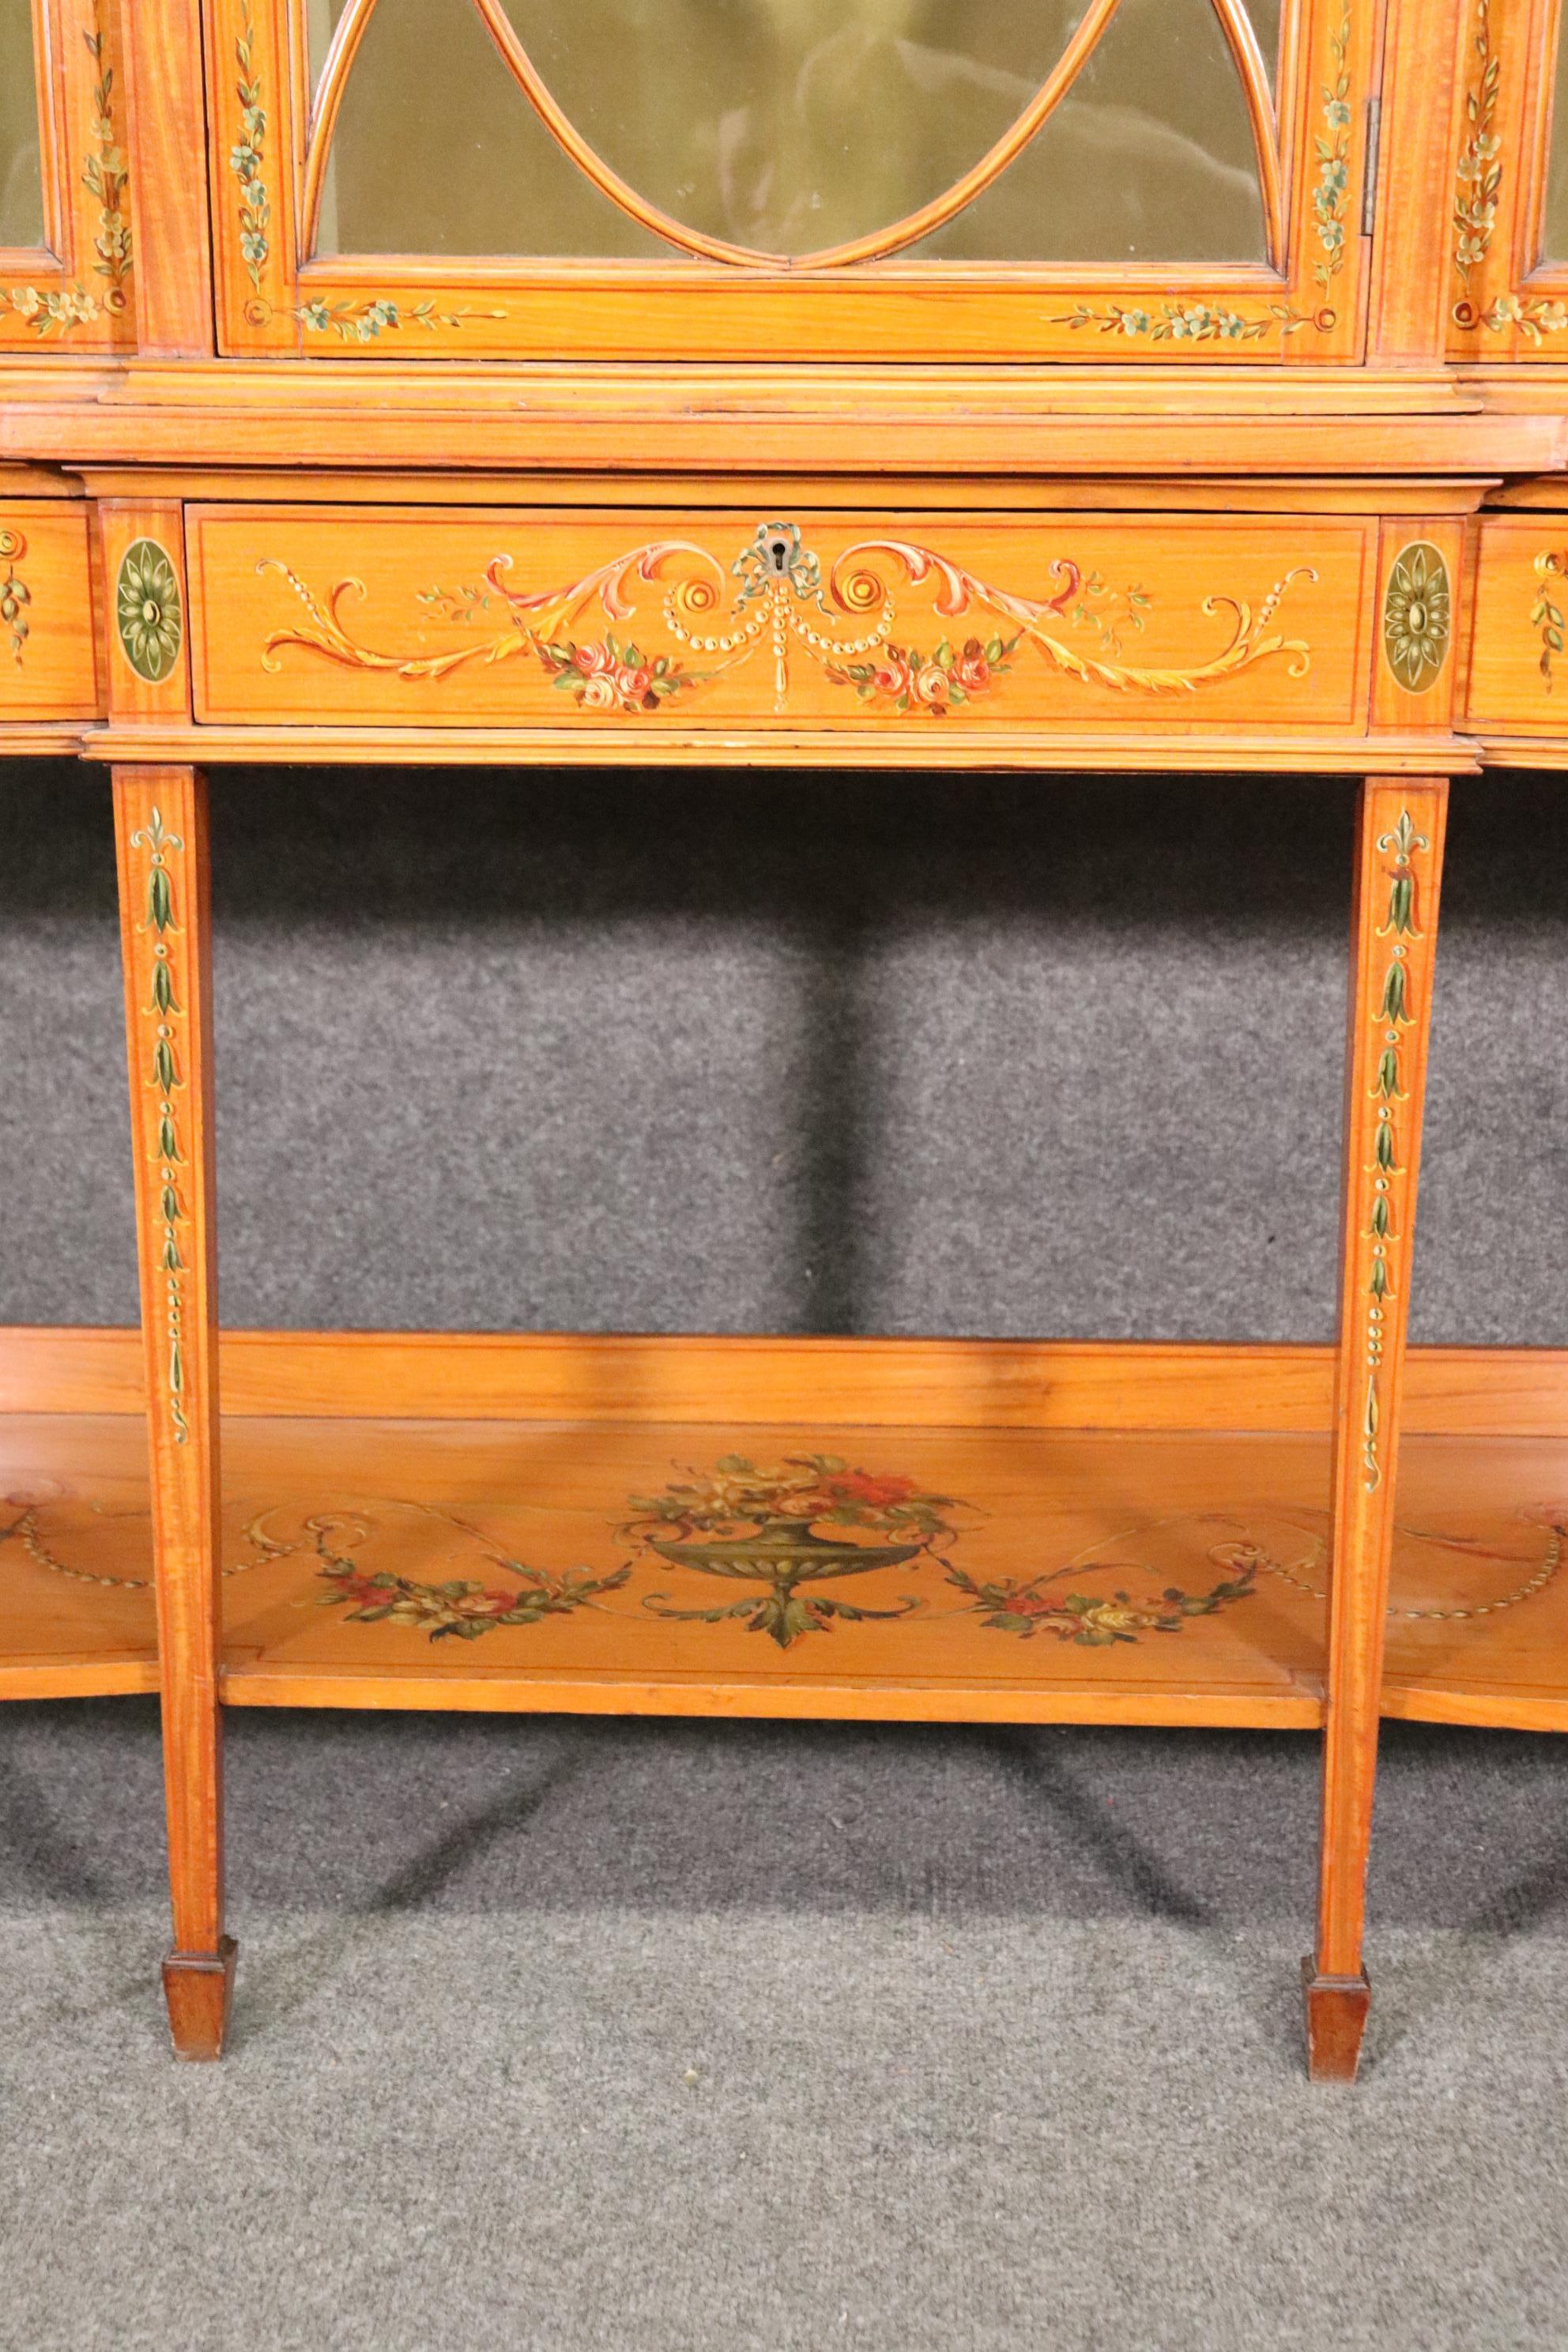 Early 20th Century Fine Satinwood Paint Decorated English Adams Vitrine China Cabinet Circa 1900 For Sale